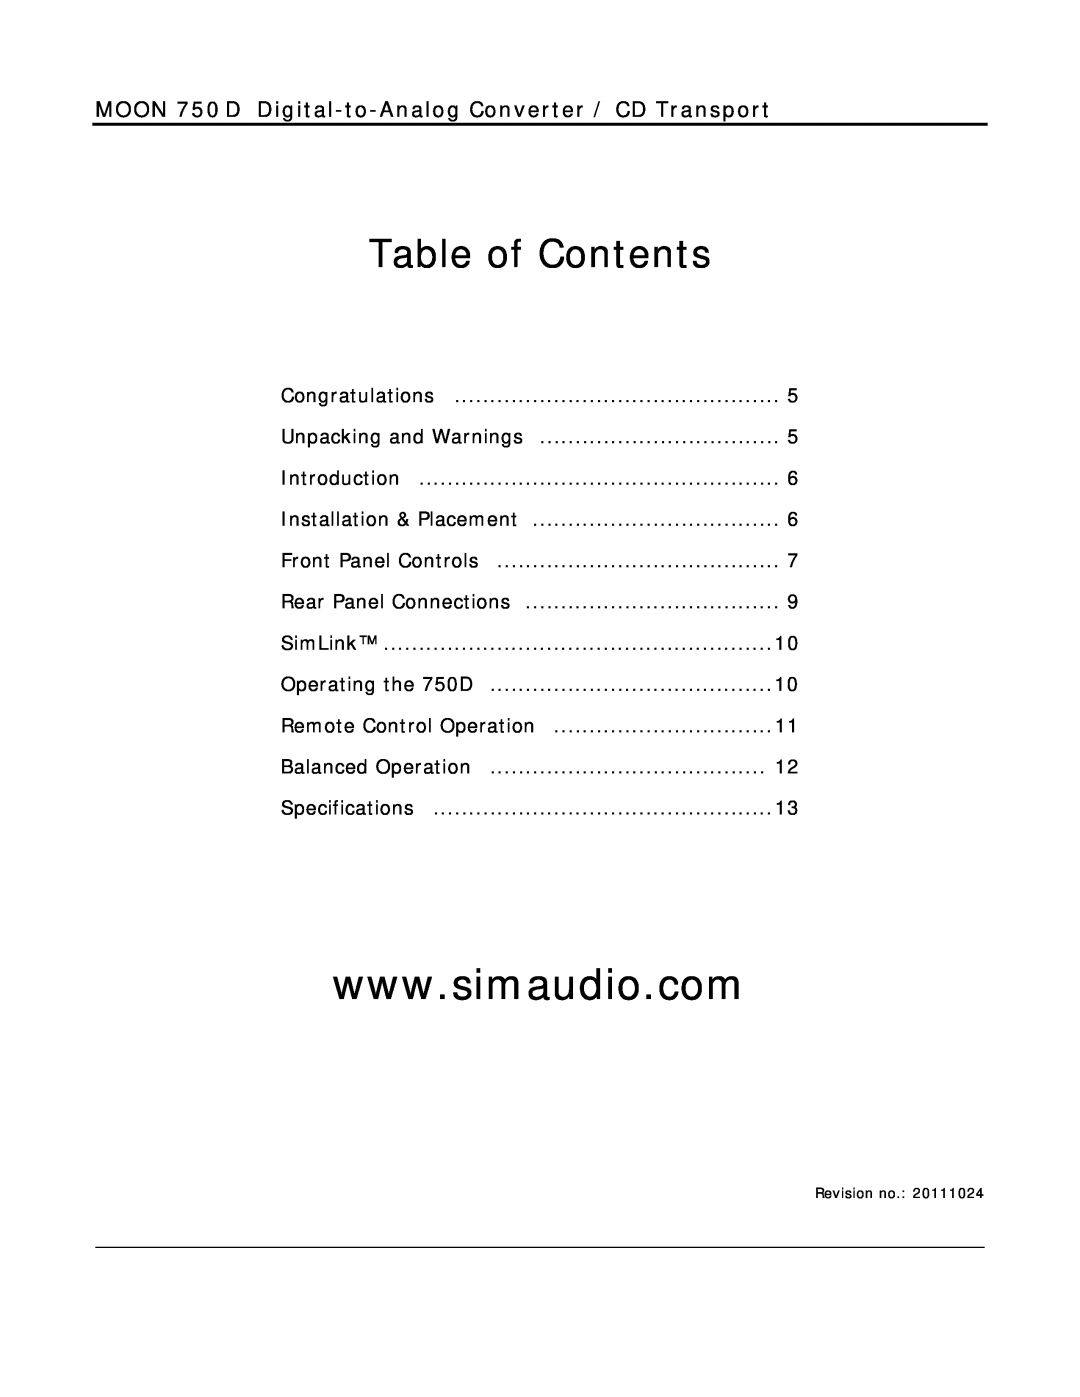 Simaudio owner manual Table of Contents, MOON 750 D Digital-to-Analog Converter / CD Transport 